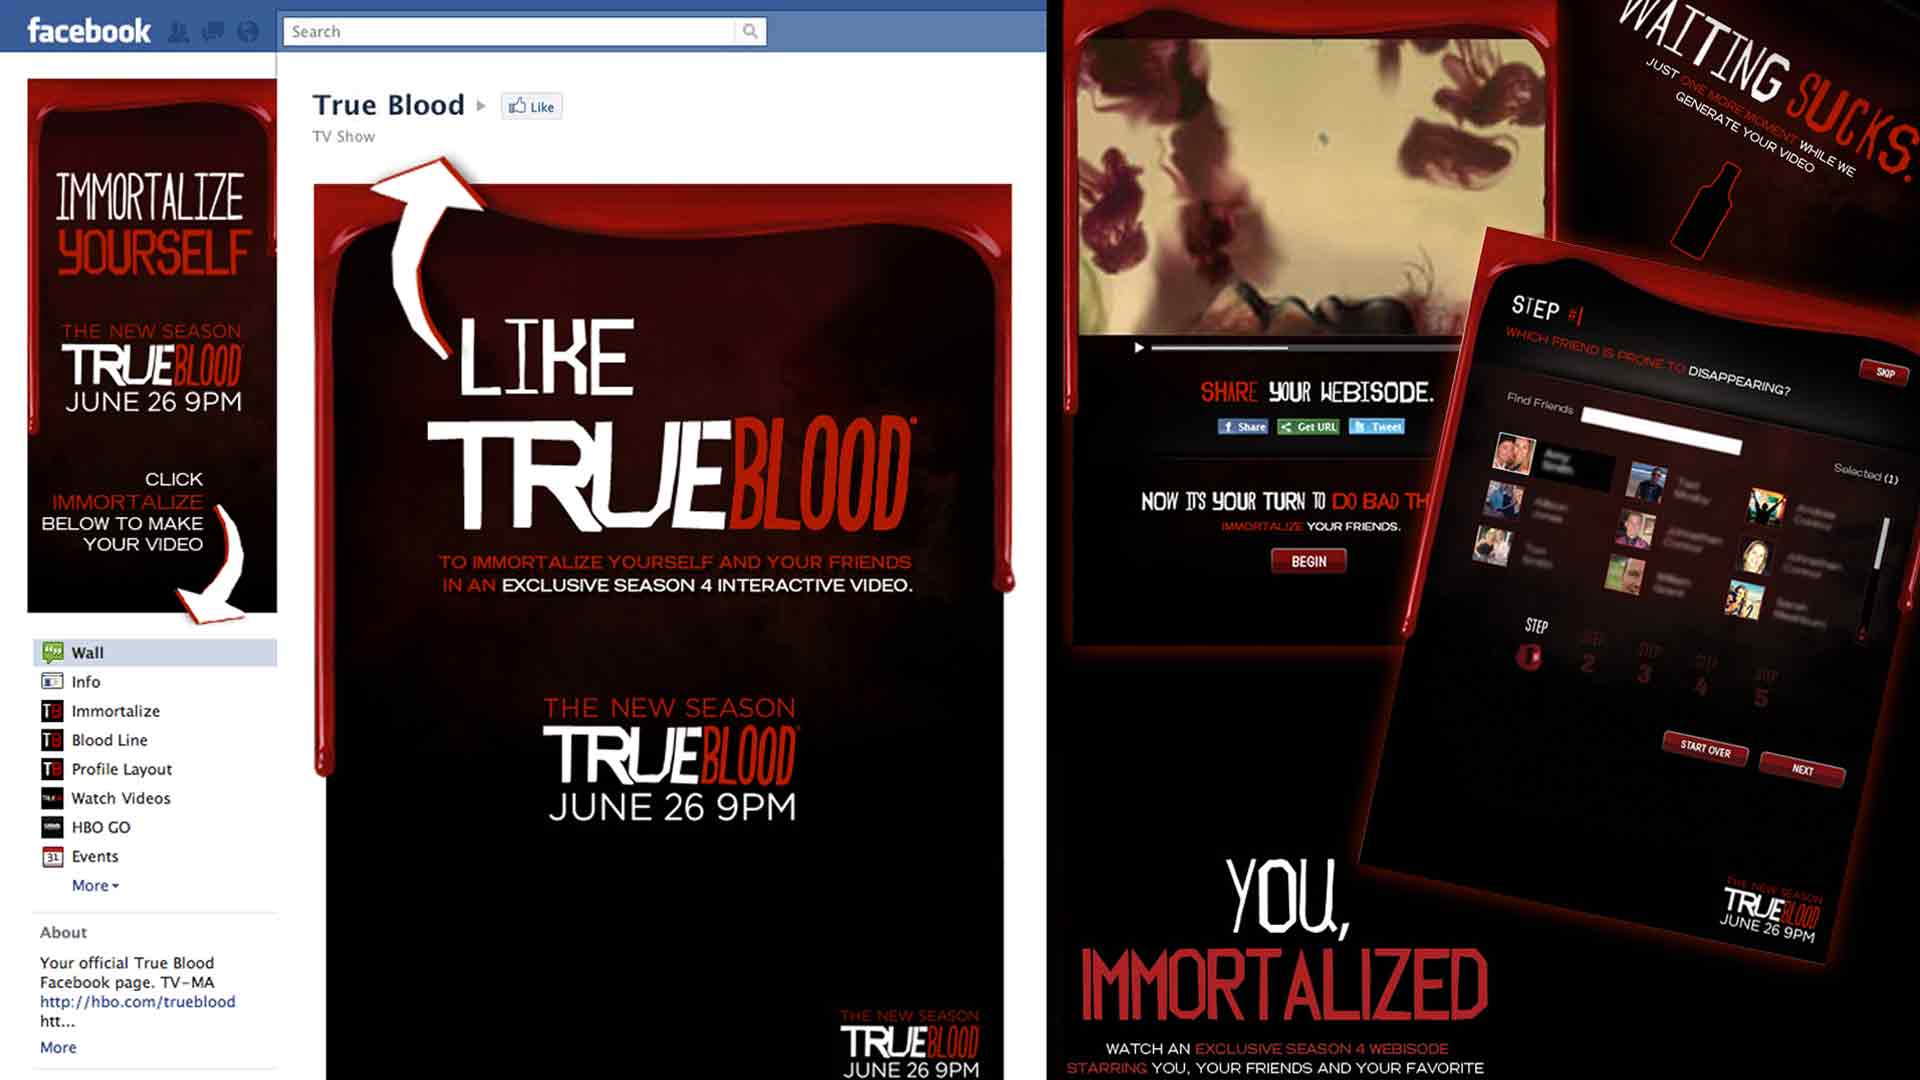 Immortalize Yourself With HBO True Blood's Video Facebook App